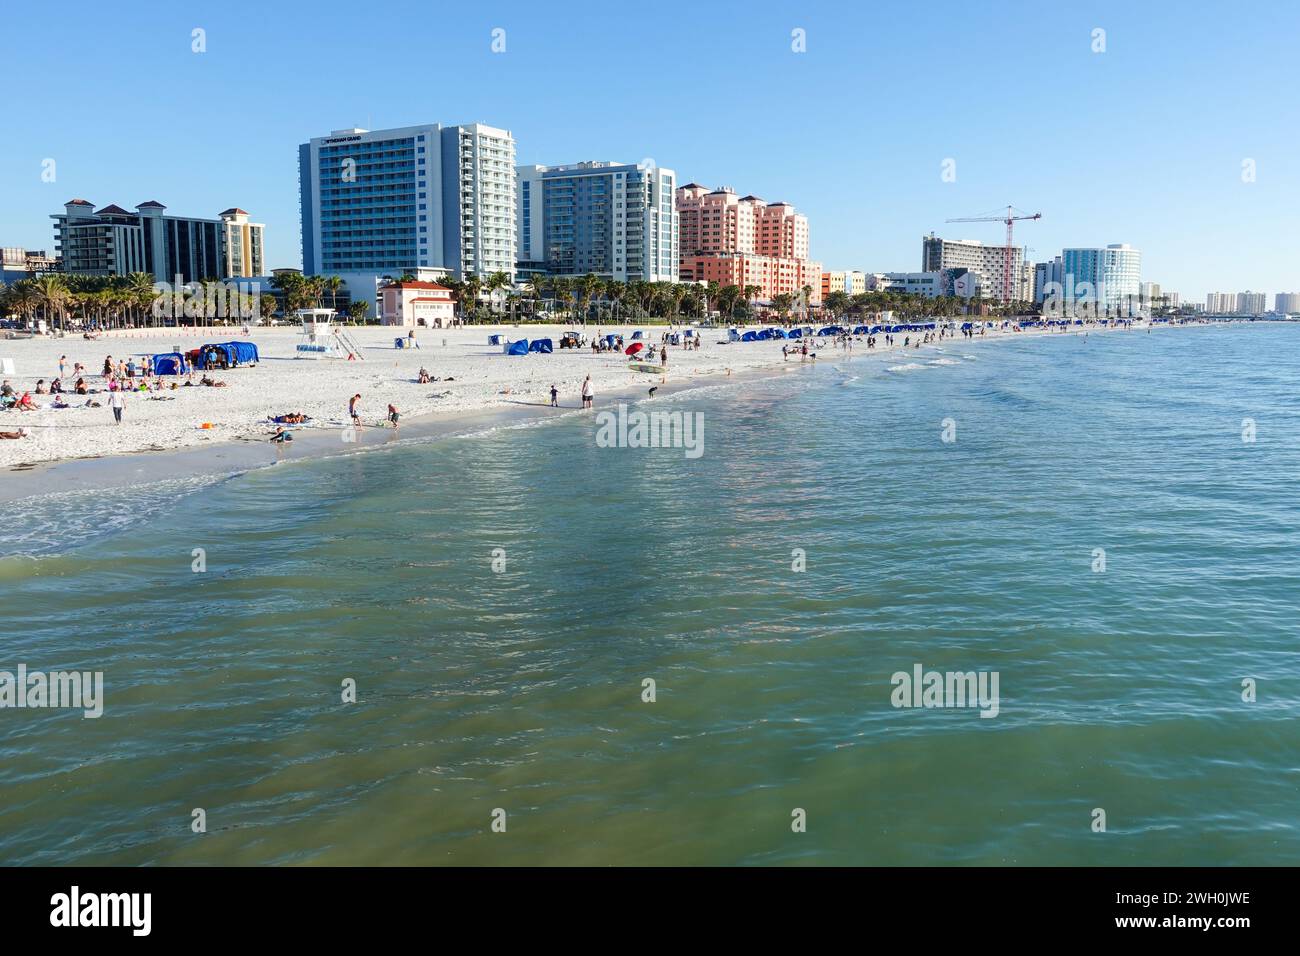 Sunny day at Clearwater Beach, Florida, with resort apartments overlooking the white sandy beach Stock Photo